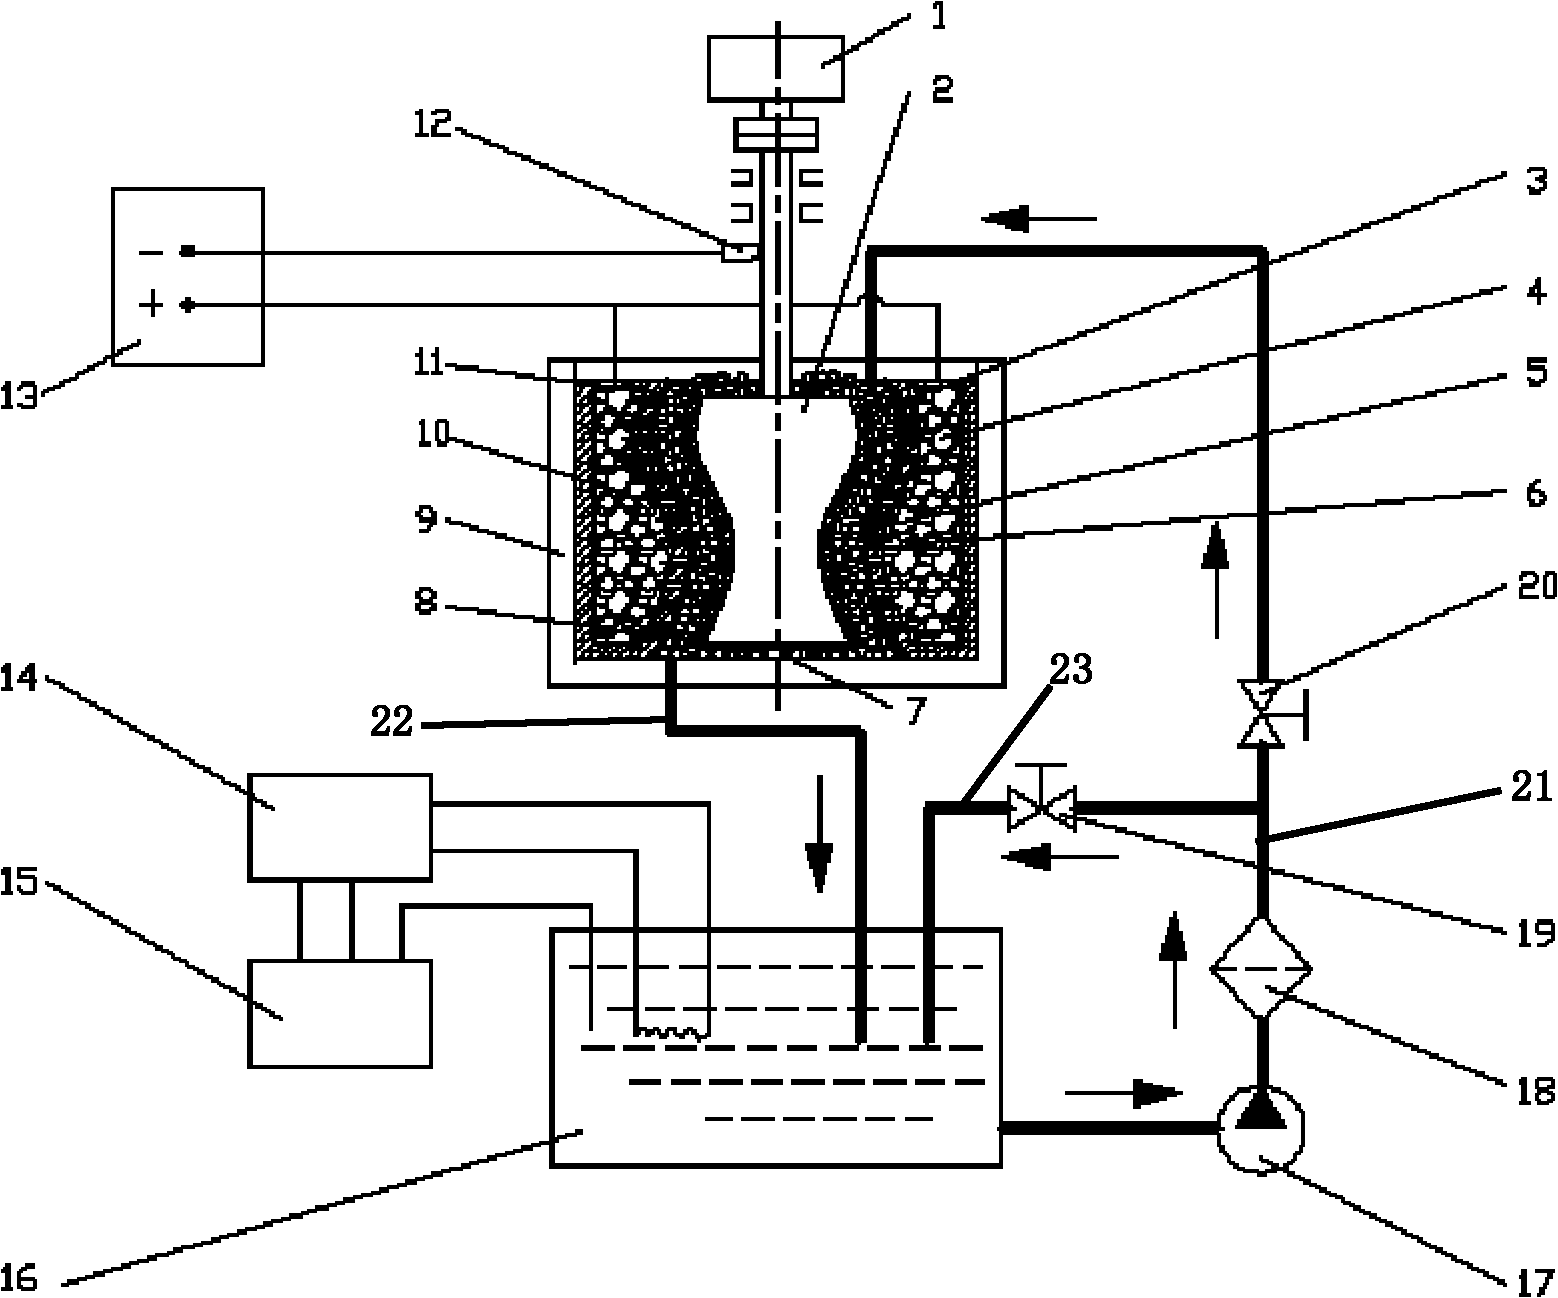 Deposition process for improving compound quantity of nanoparticles in electric deposition